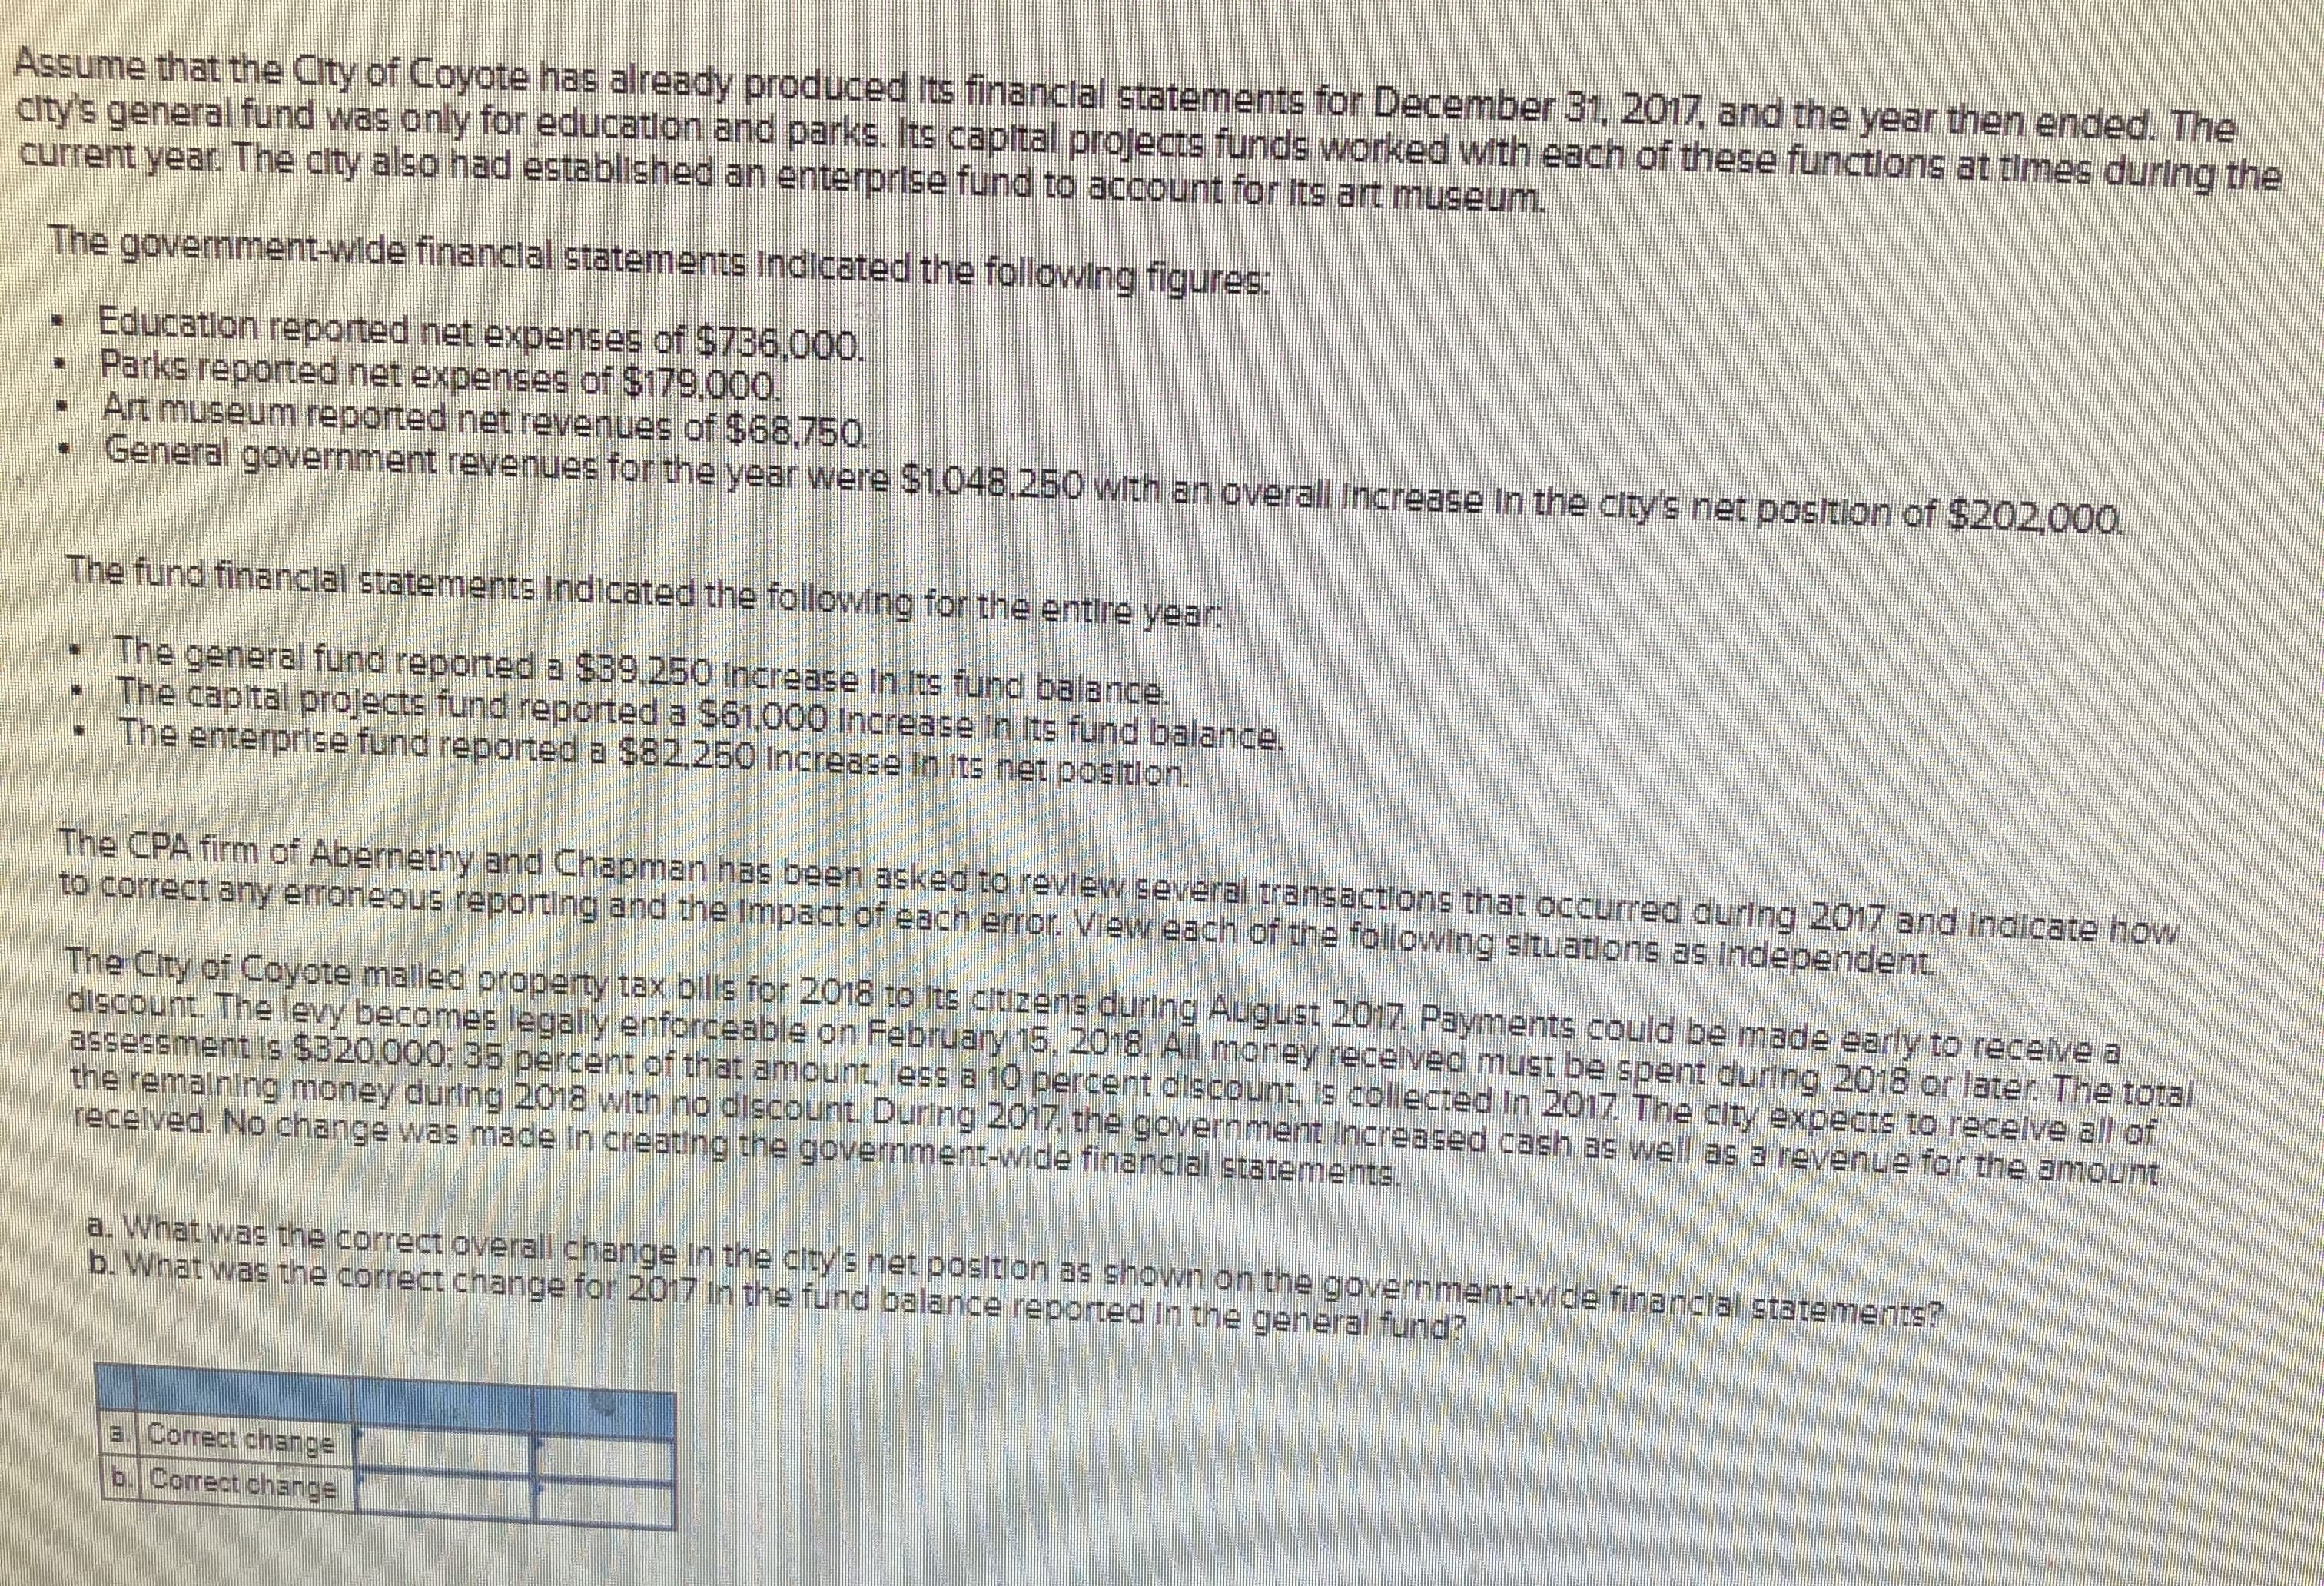 Assume that the City of Coyote has already produced Its financlal statements for December 31, 2017, and the year then ended. The
city's general fund was only for education and parks. Its capital projects funds worked wth each of these functlons at times during the
current year. The city also had established an enterprise fund to account for Its art museum.
